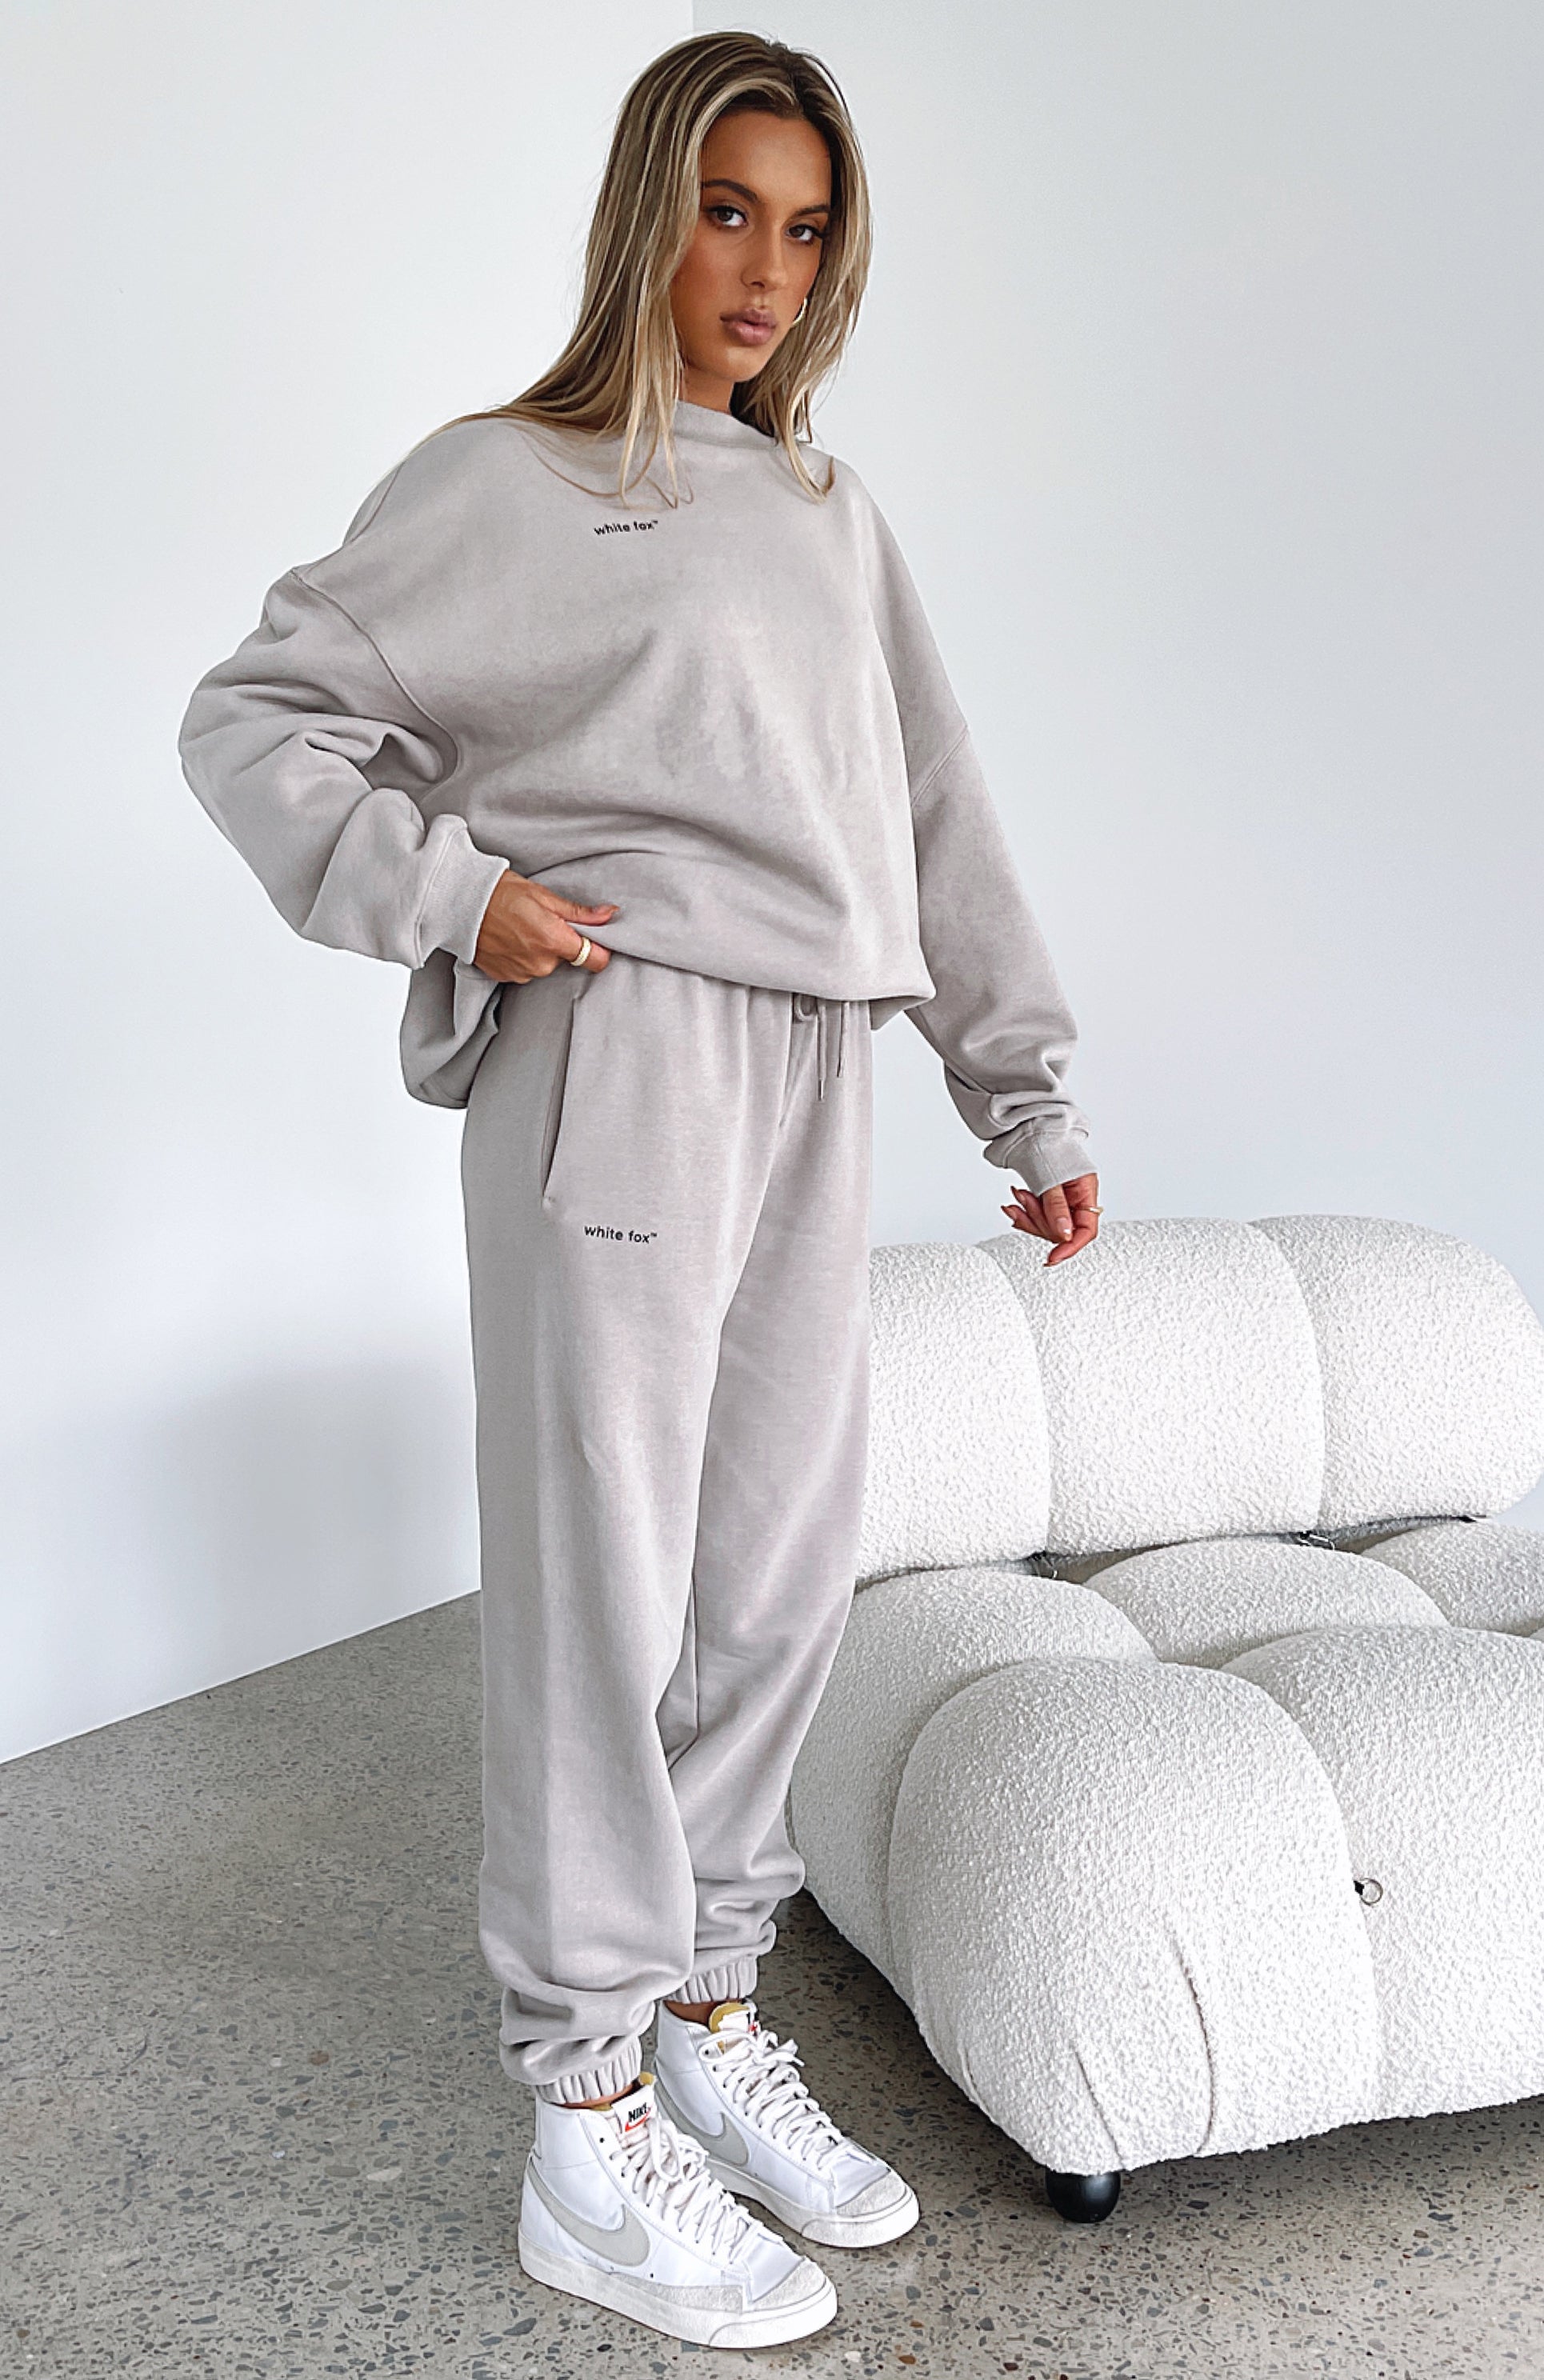 Not An Issue Sweatpants Mushroom | White Fox Boutique US